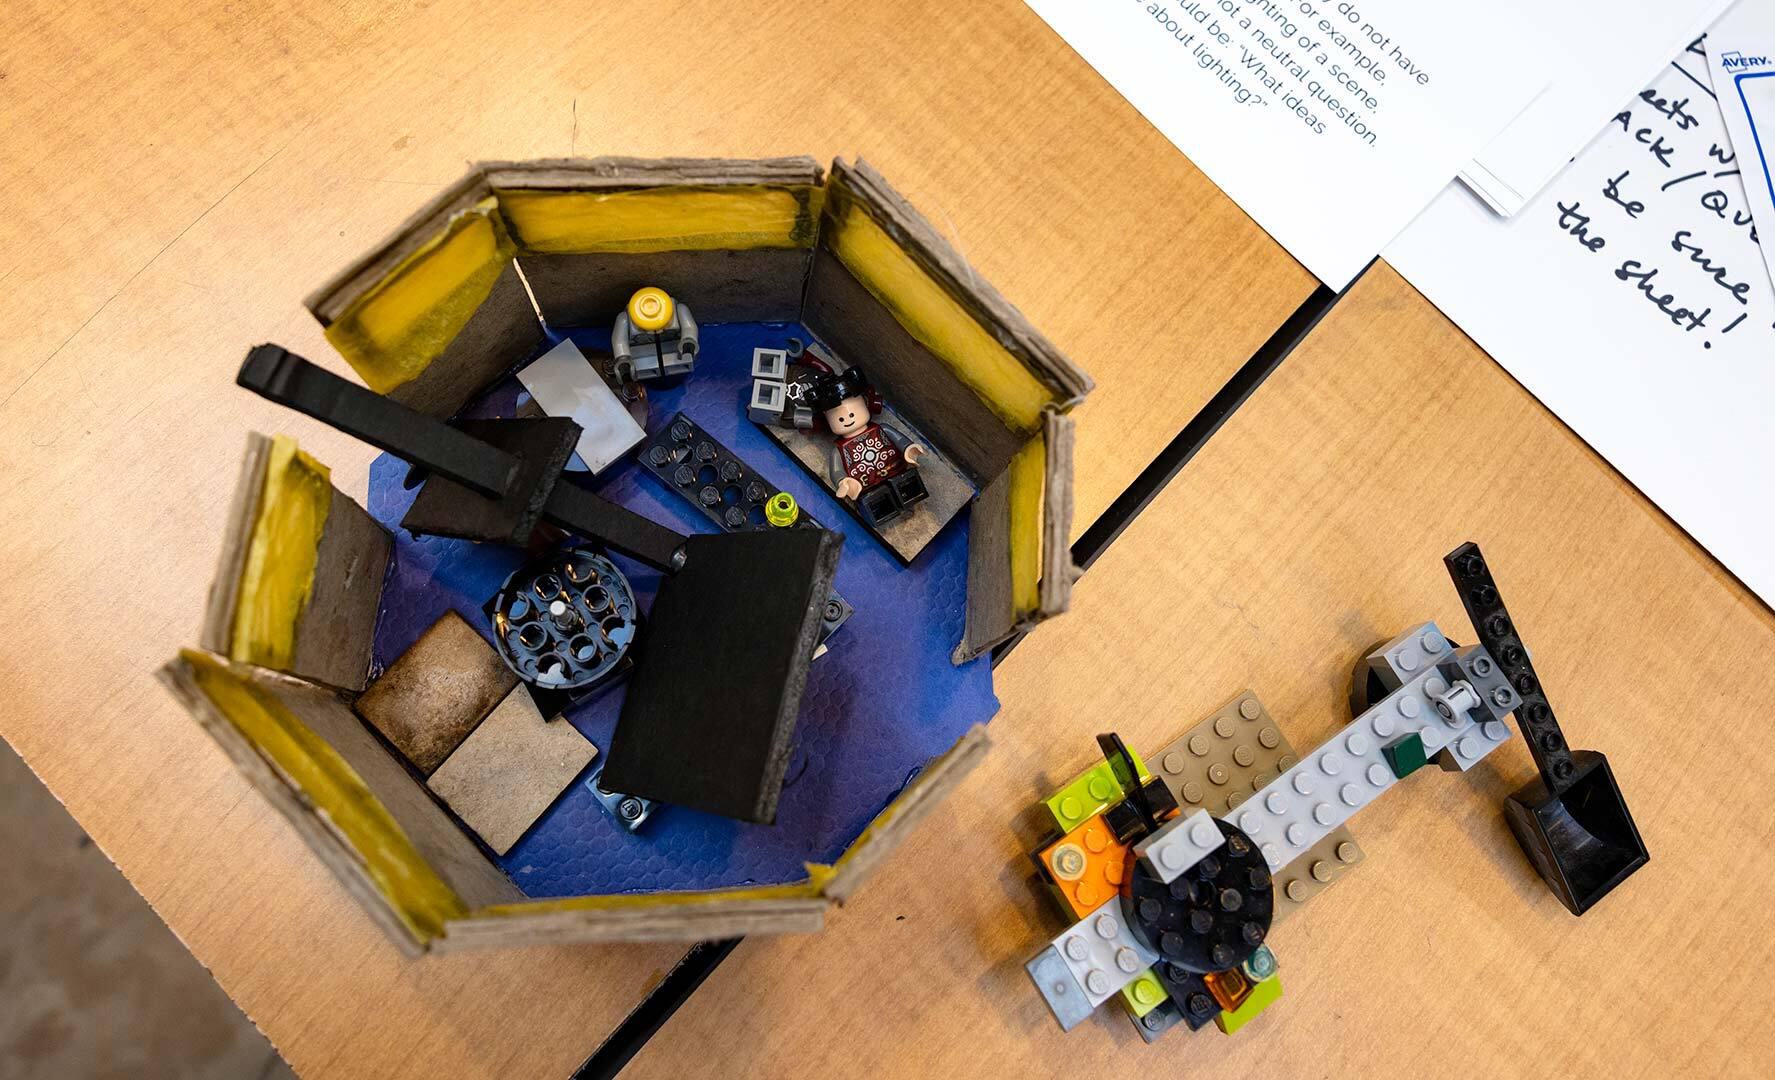 Lego model of voting pop-up project